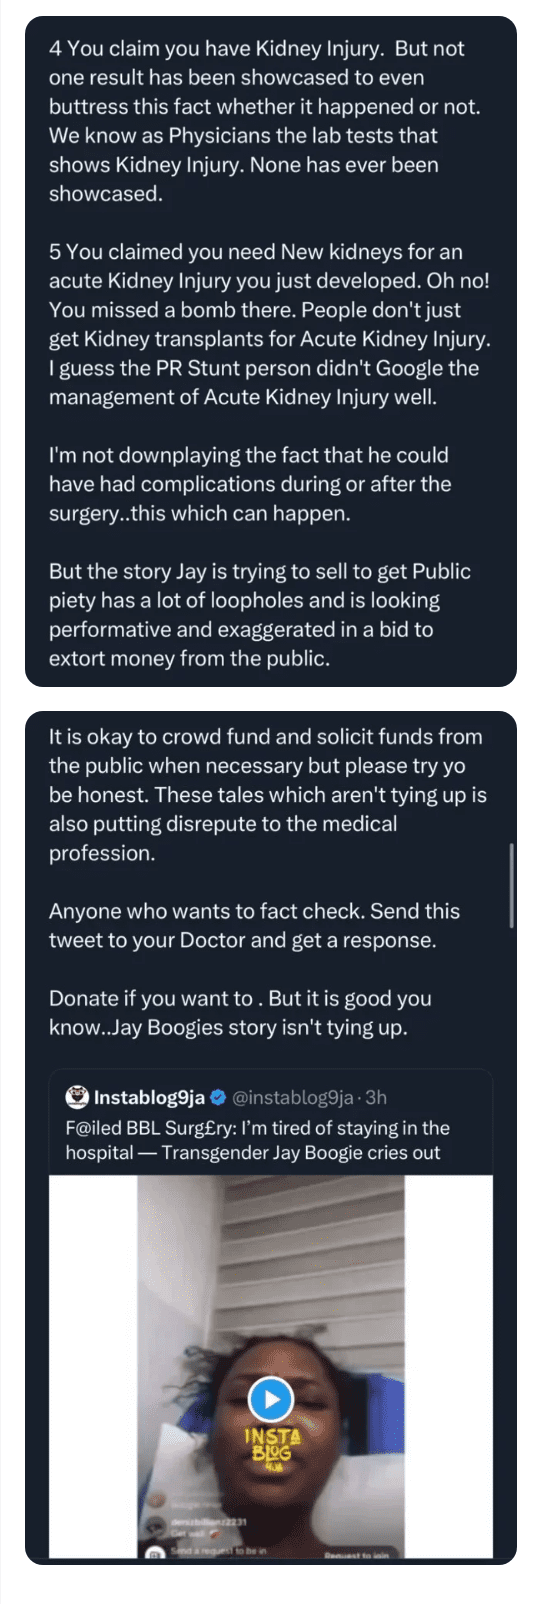 "This Story Isn’t Adding Up” - Doctor Drags Jay Boogie For Lying About Her Kidnеy Transplant To Gather Public Sympathy And Money